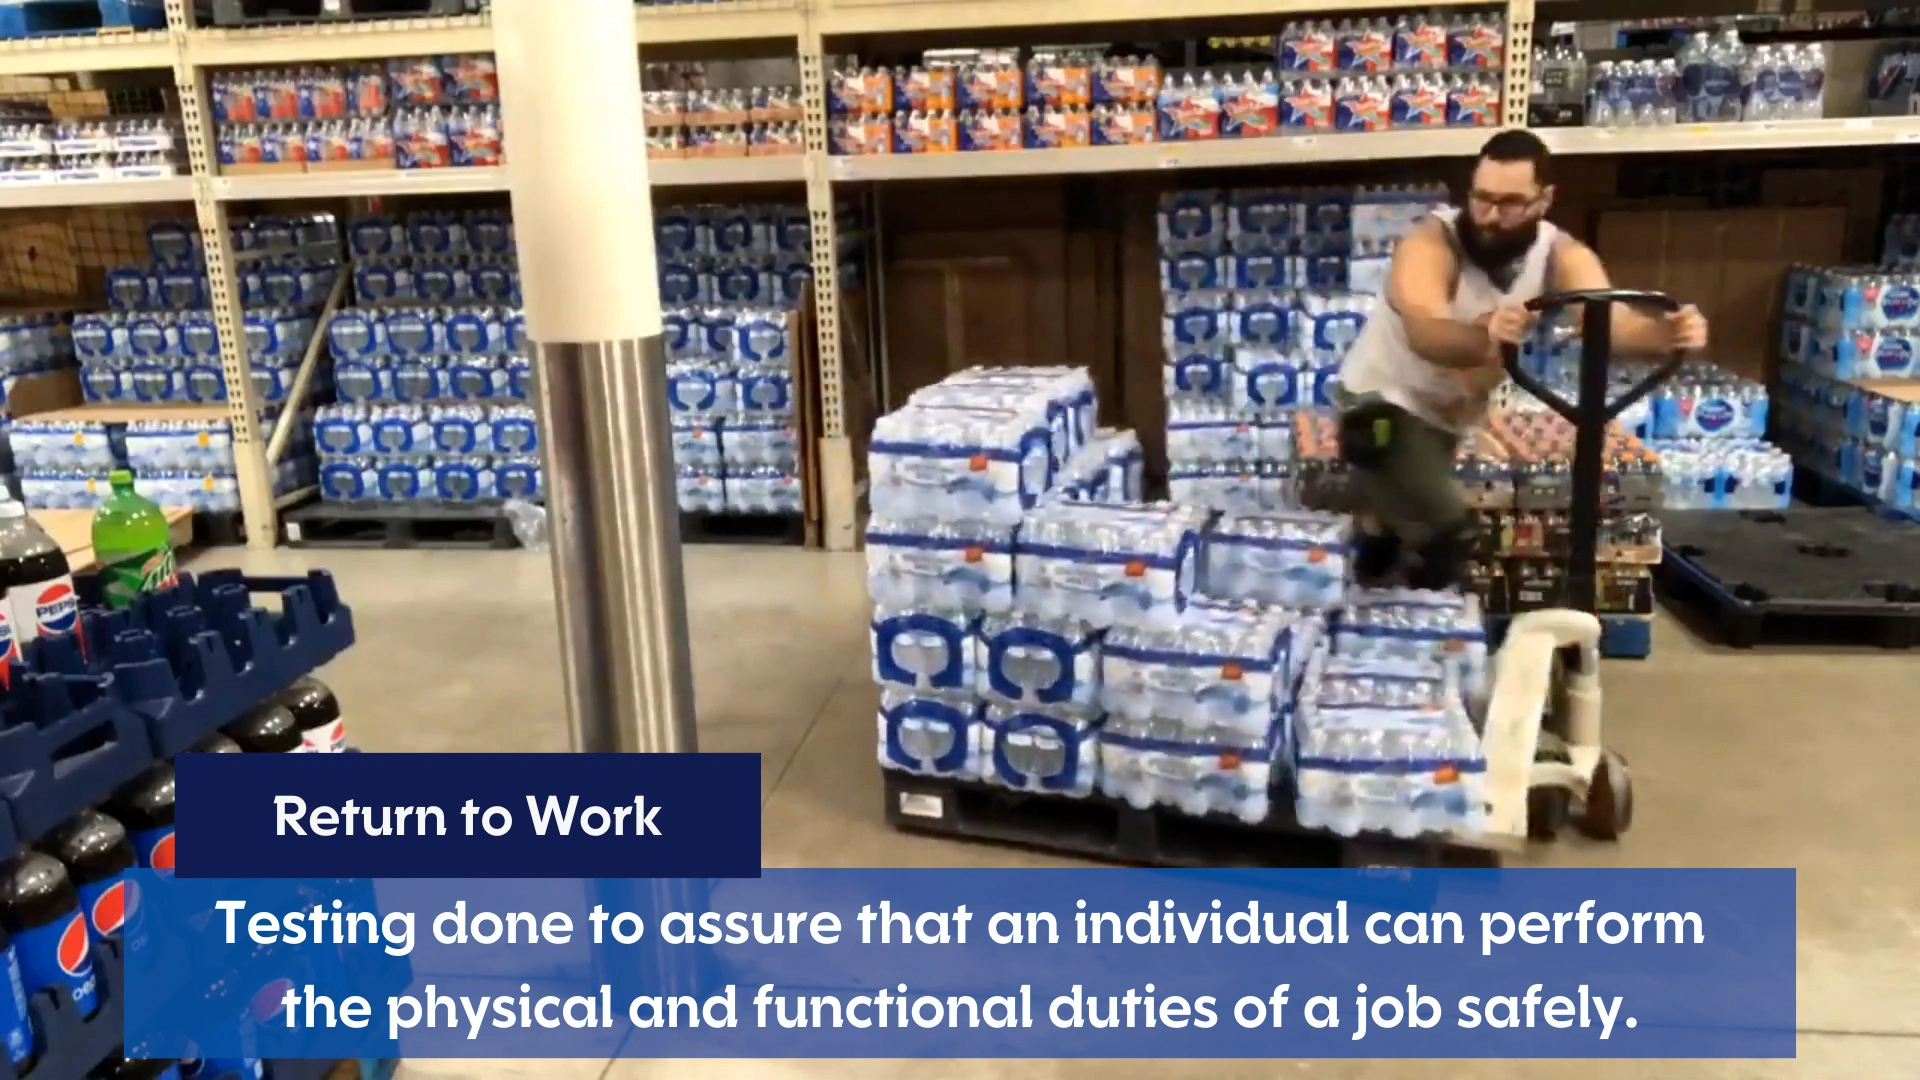 A man is pushing a cart with a lot of bottled waters demonstrating a job task.